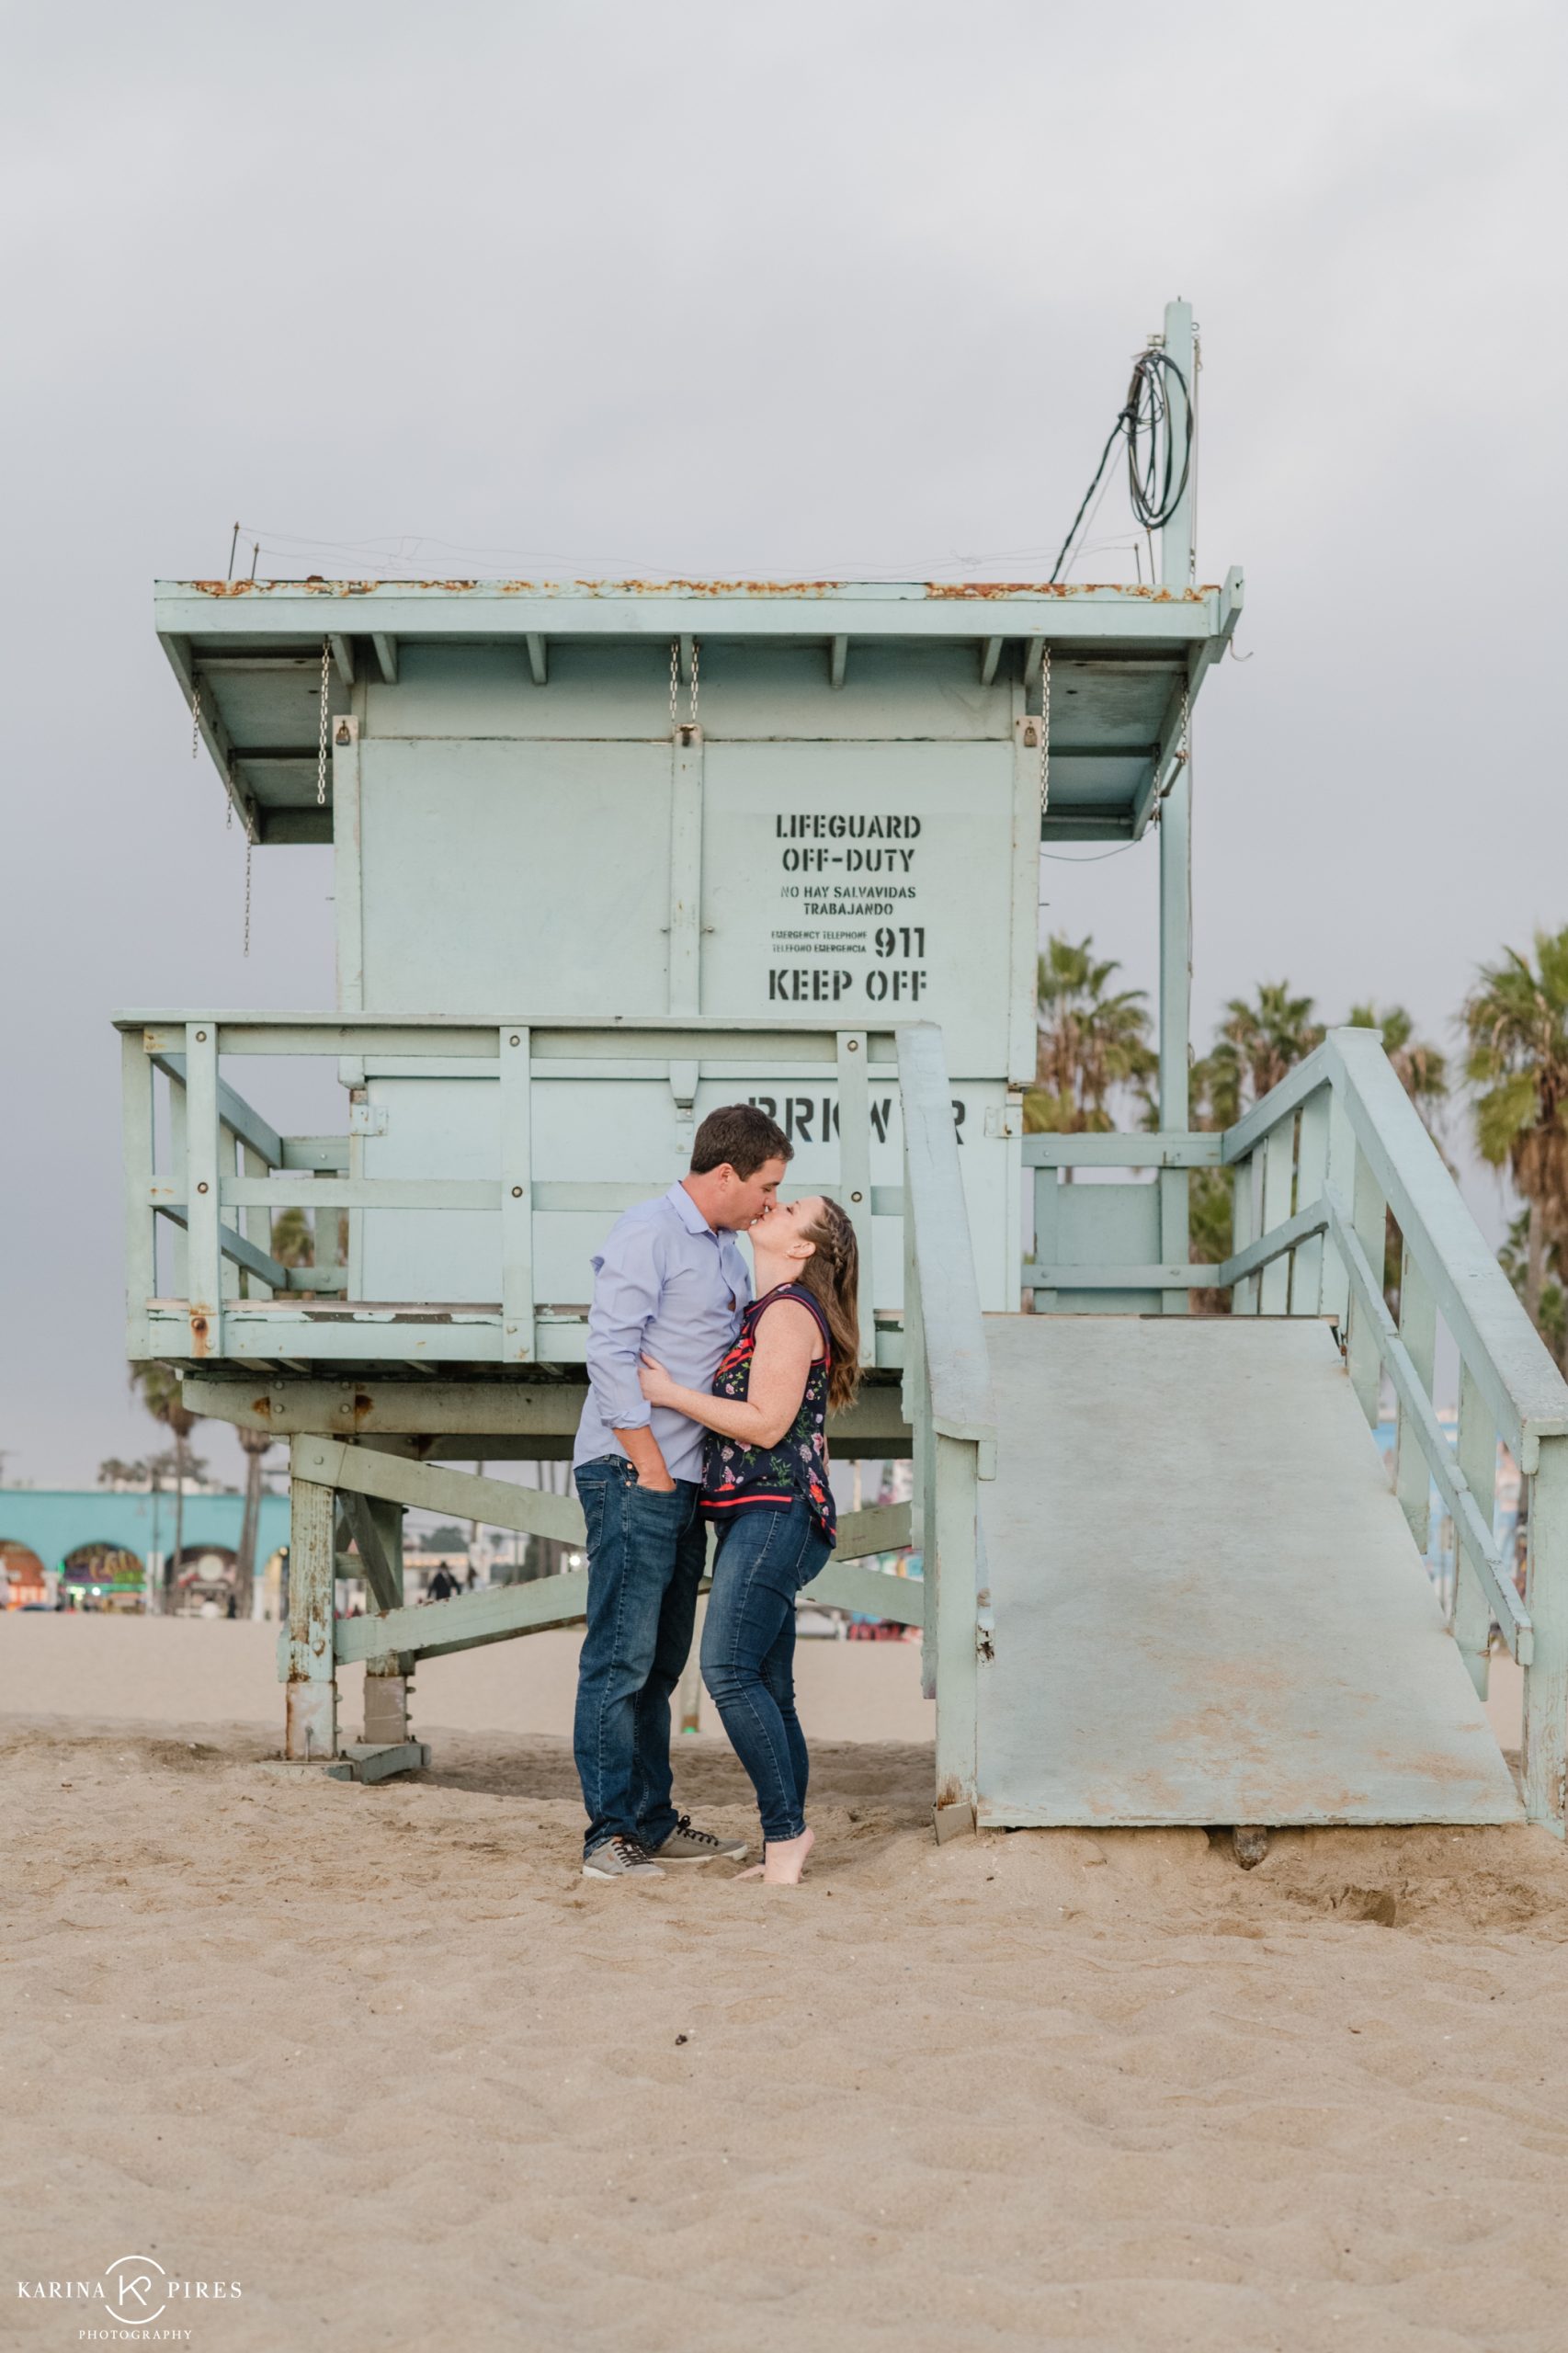 Lindsay and Kyle’s Venice Beach Engagement Session | Karina Pires Photography